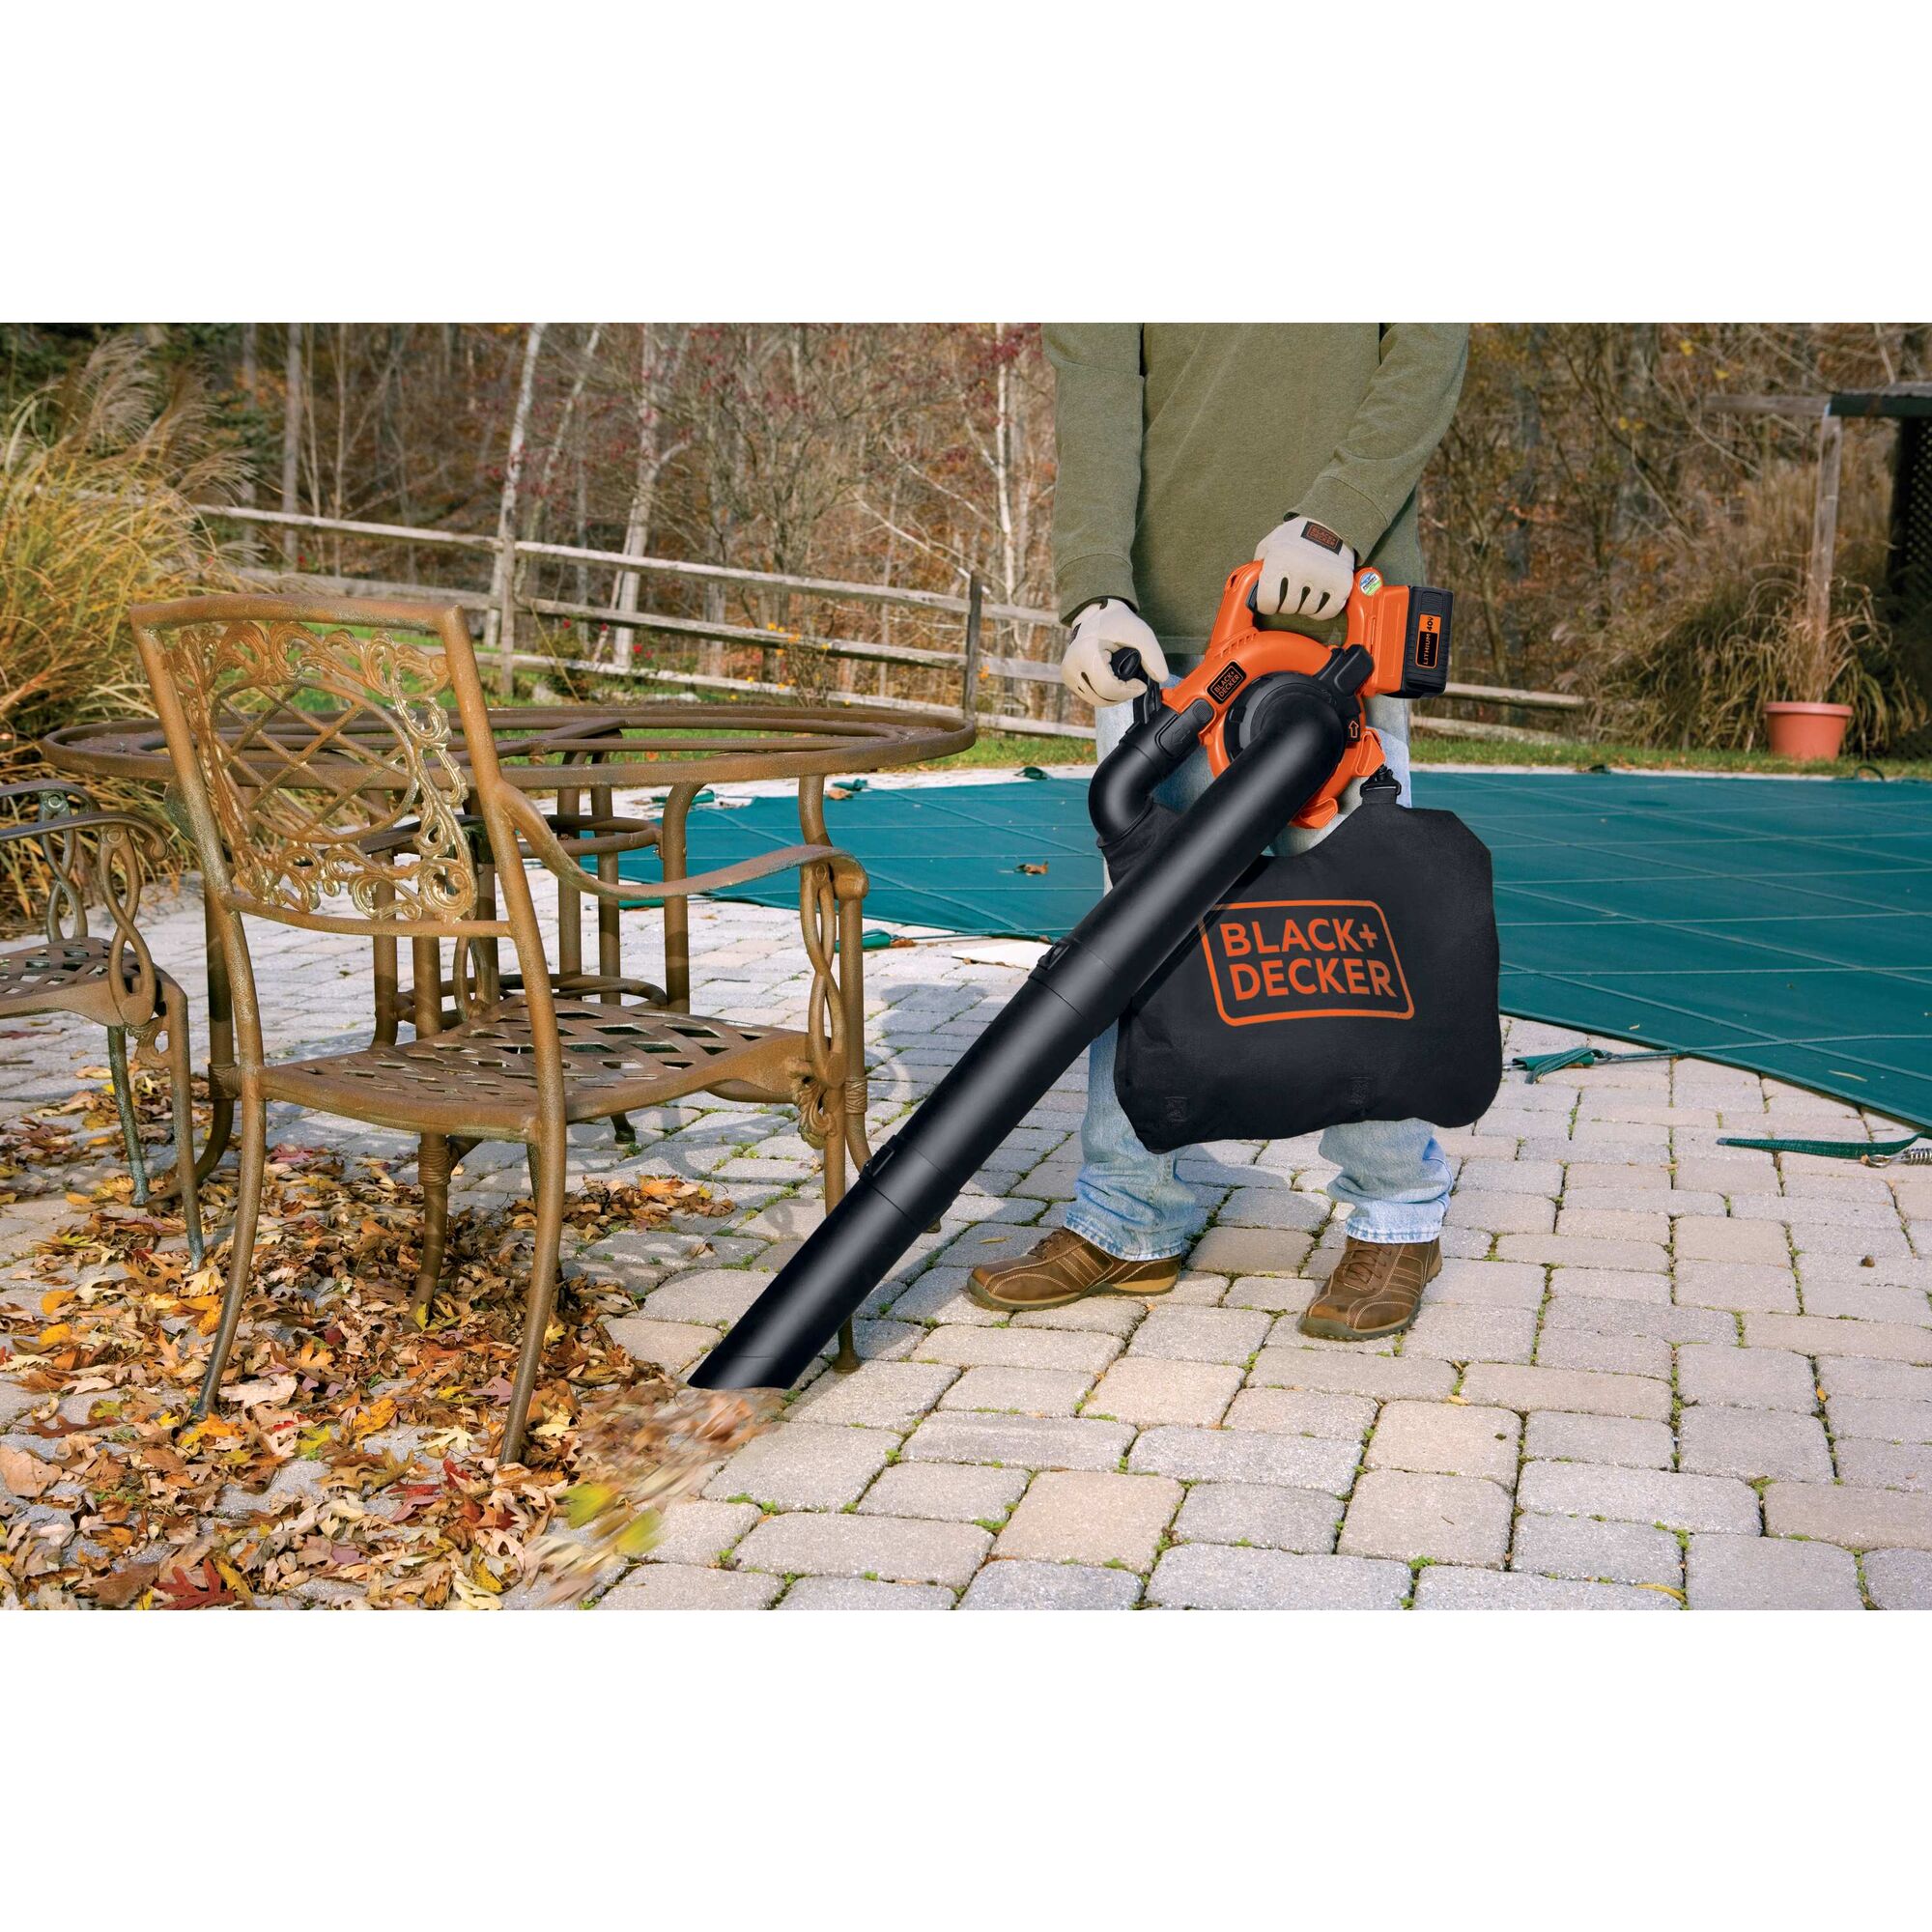 Man using Cordless Leaf Blower/Vacuum to clear leaves near a pool.